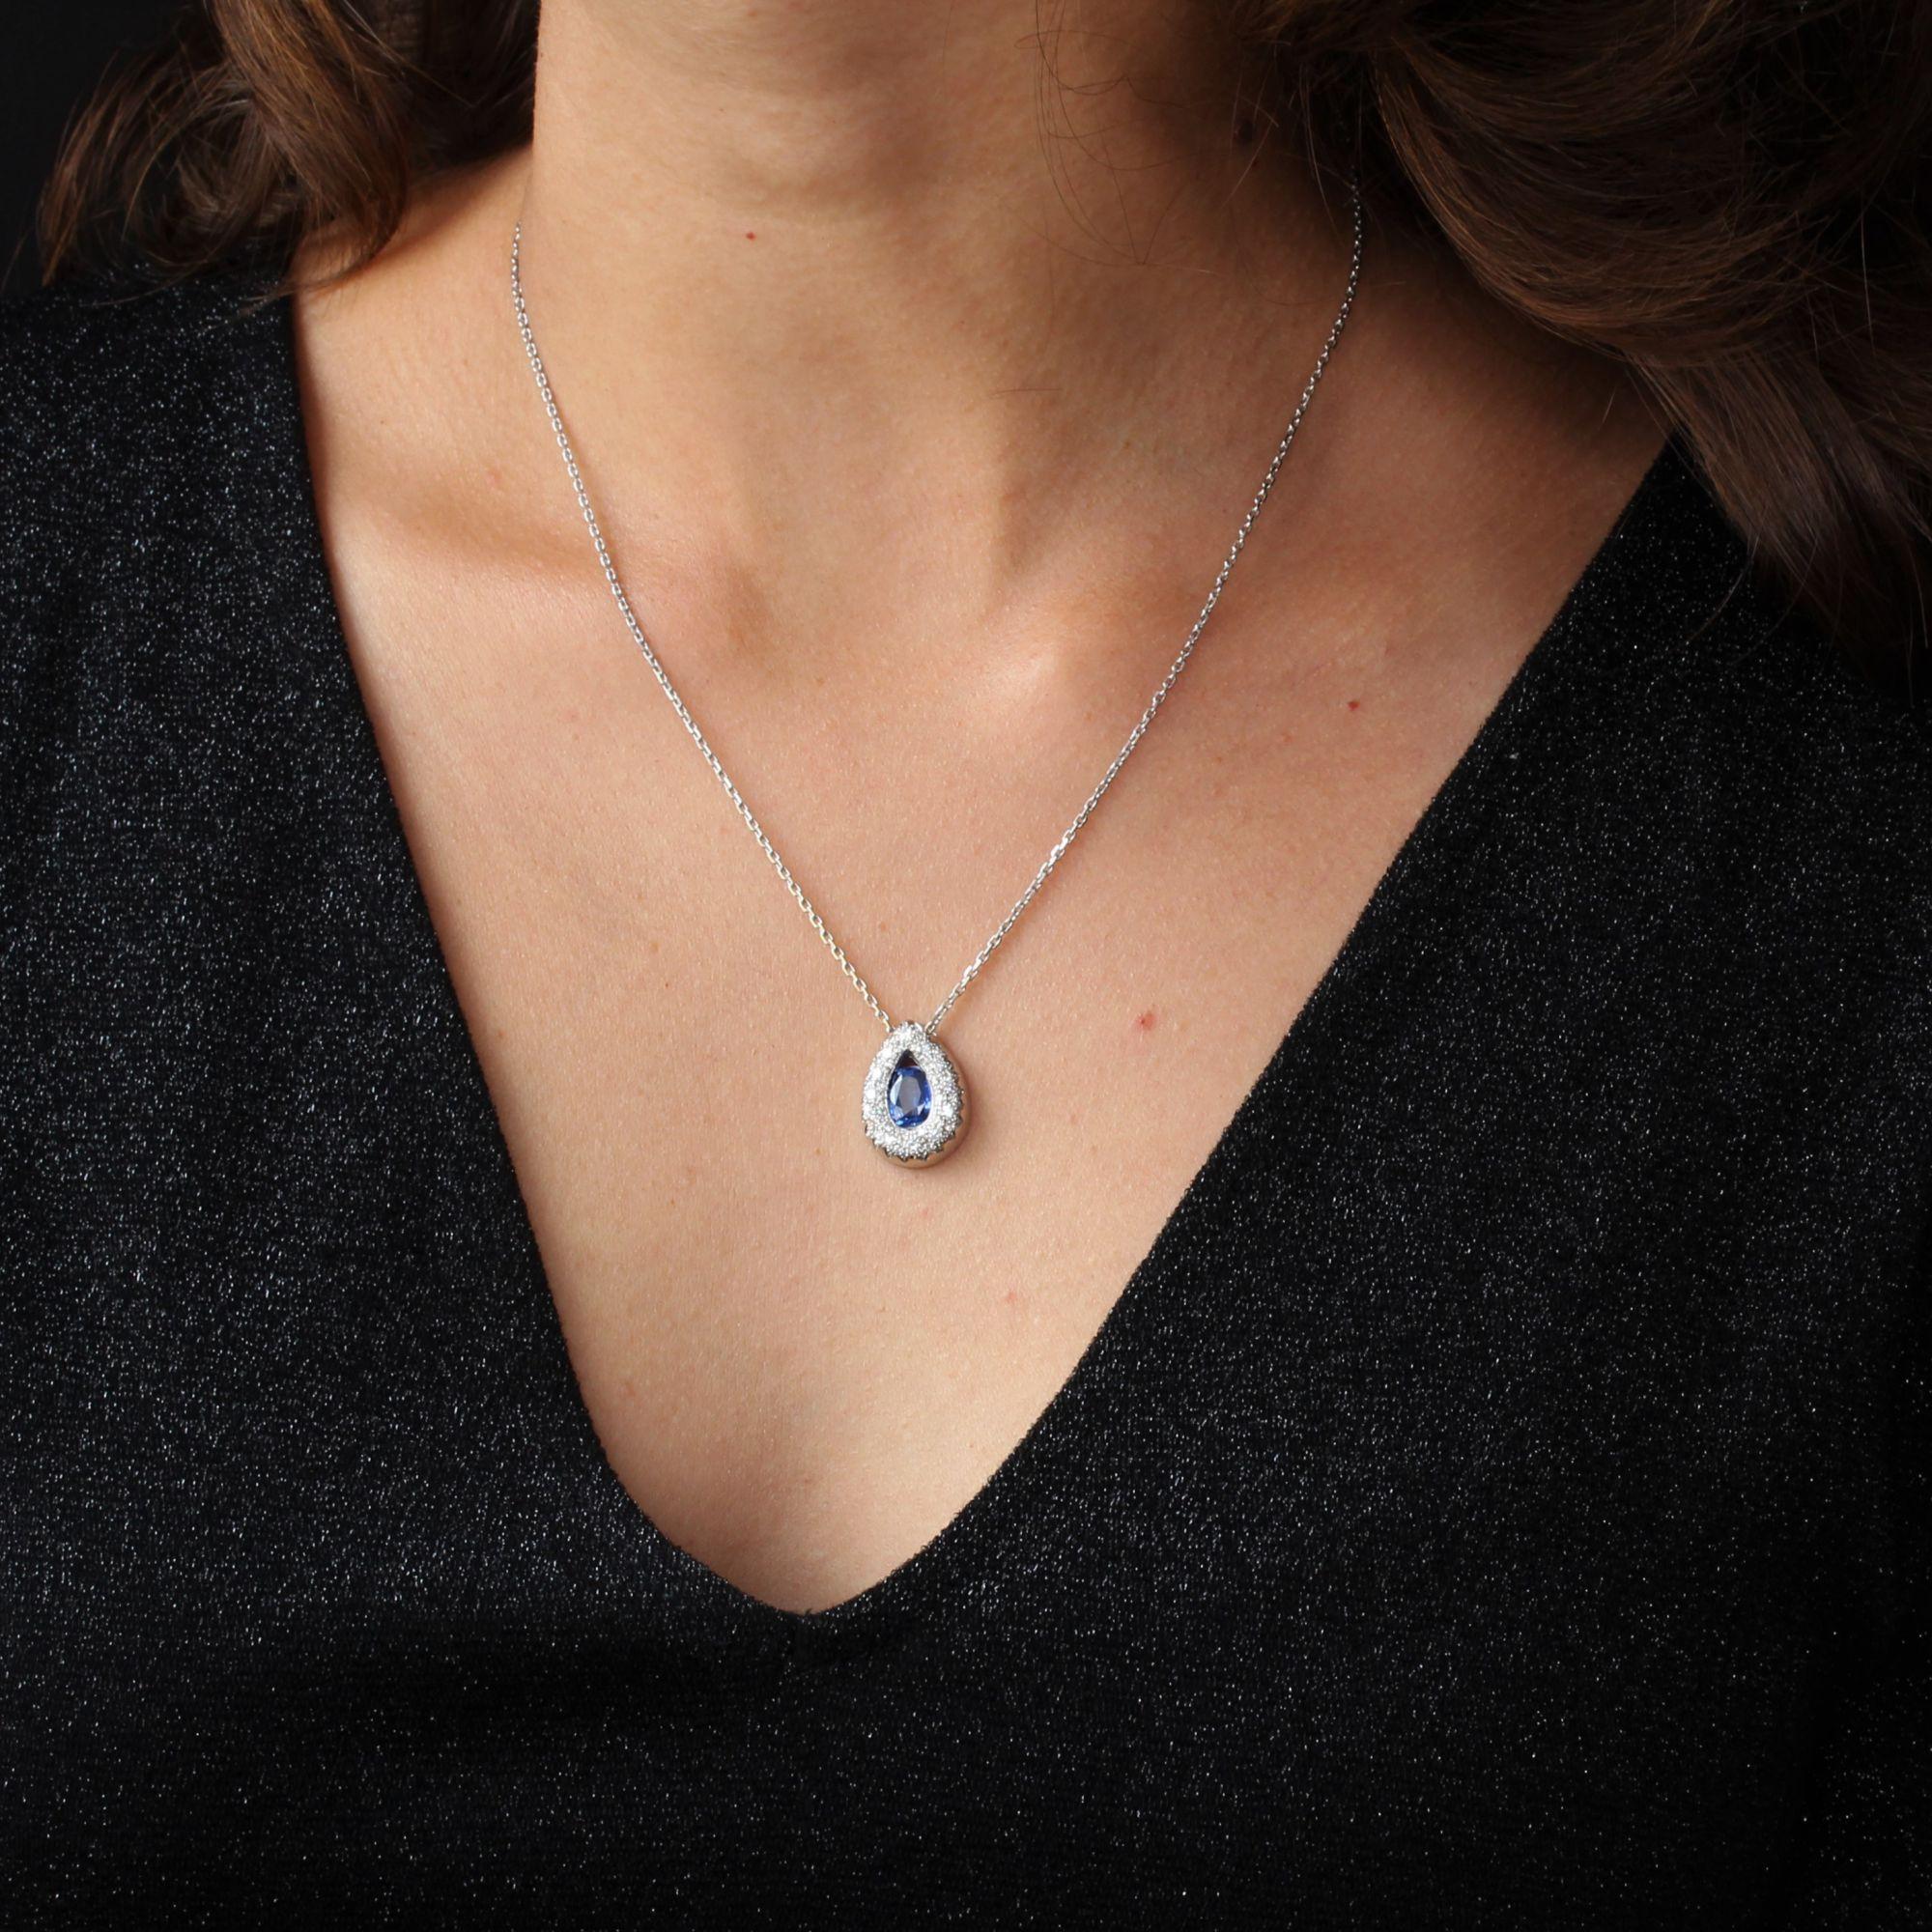 Pendant in 18 karat white gold, eagle head hallmark.
In the shape of a drop, this jewelry pendant has in the center a blue cushion sapphire surrounded by a pavement of diamonds. The chain is a thin convict mesh filed. The clasp is a spring